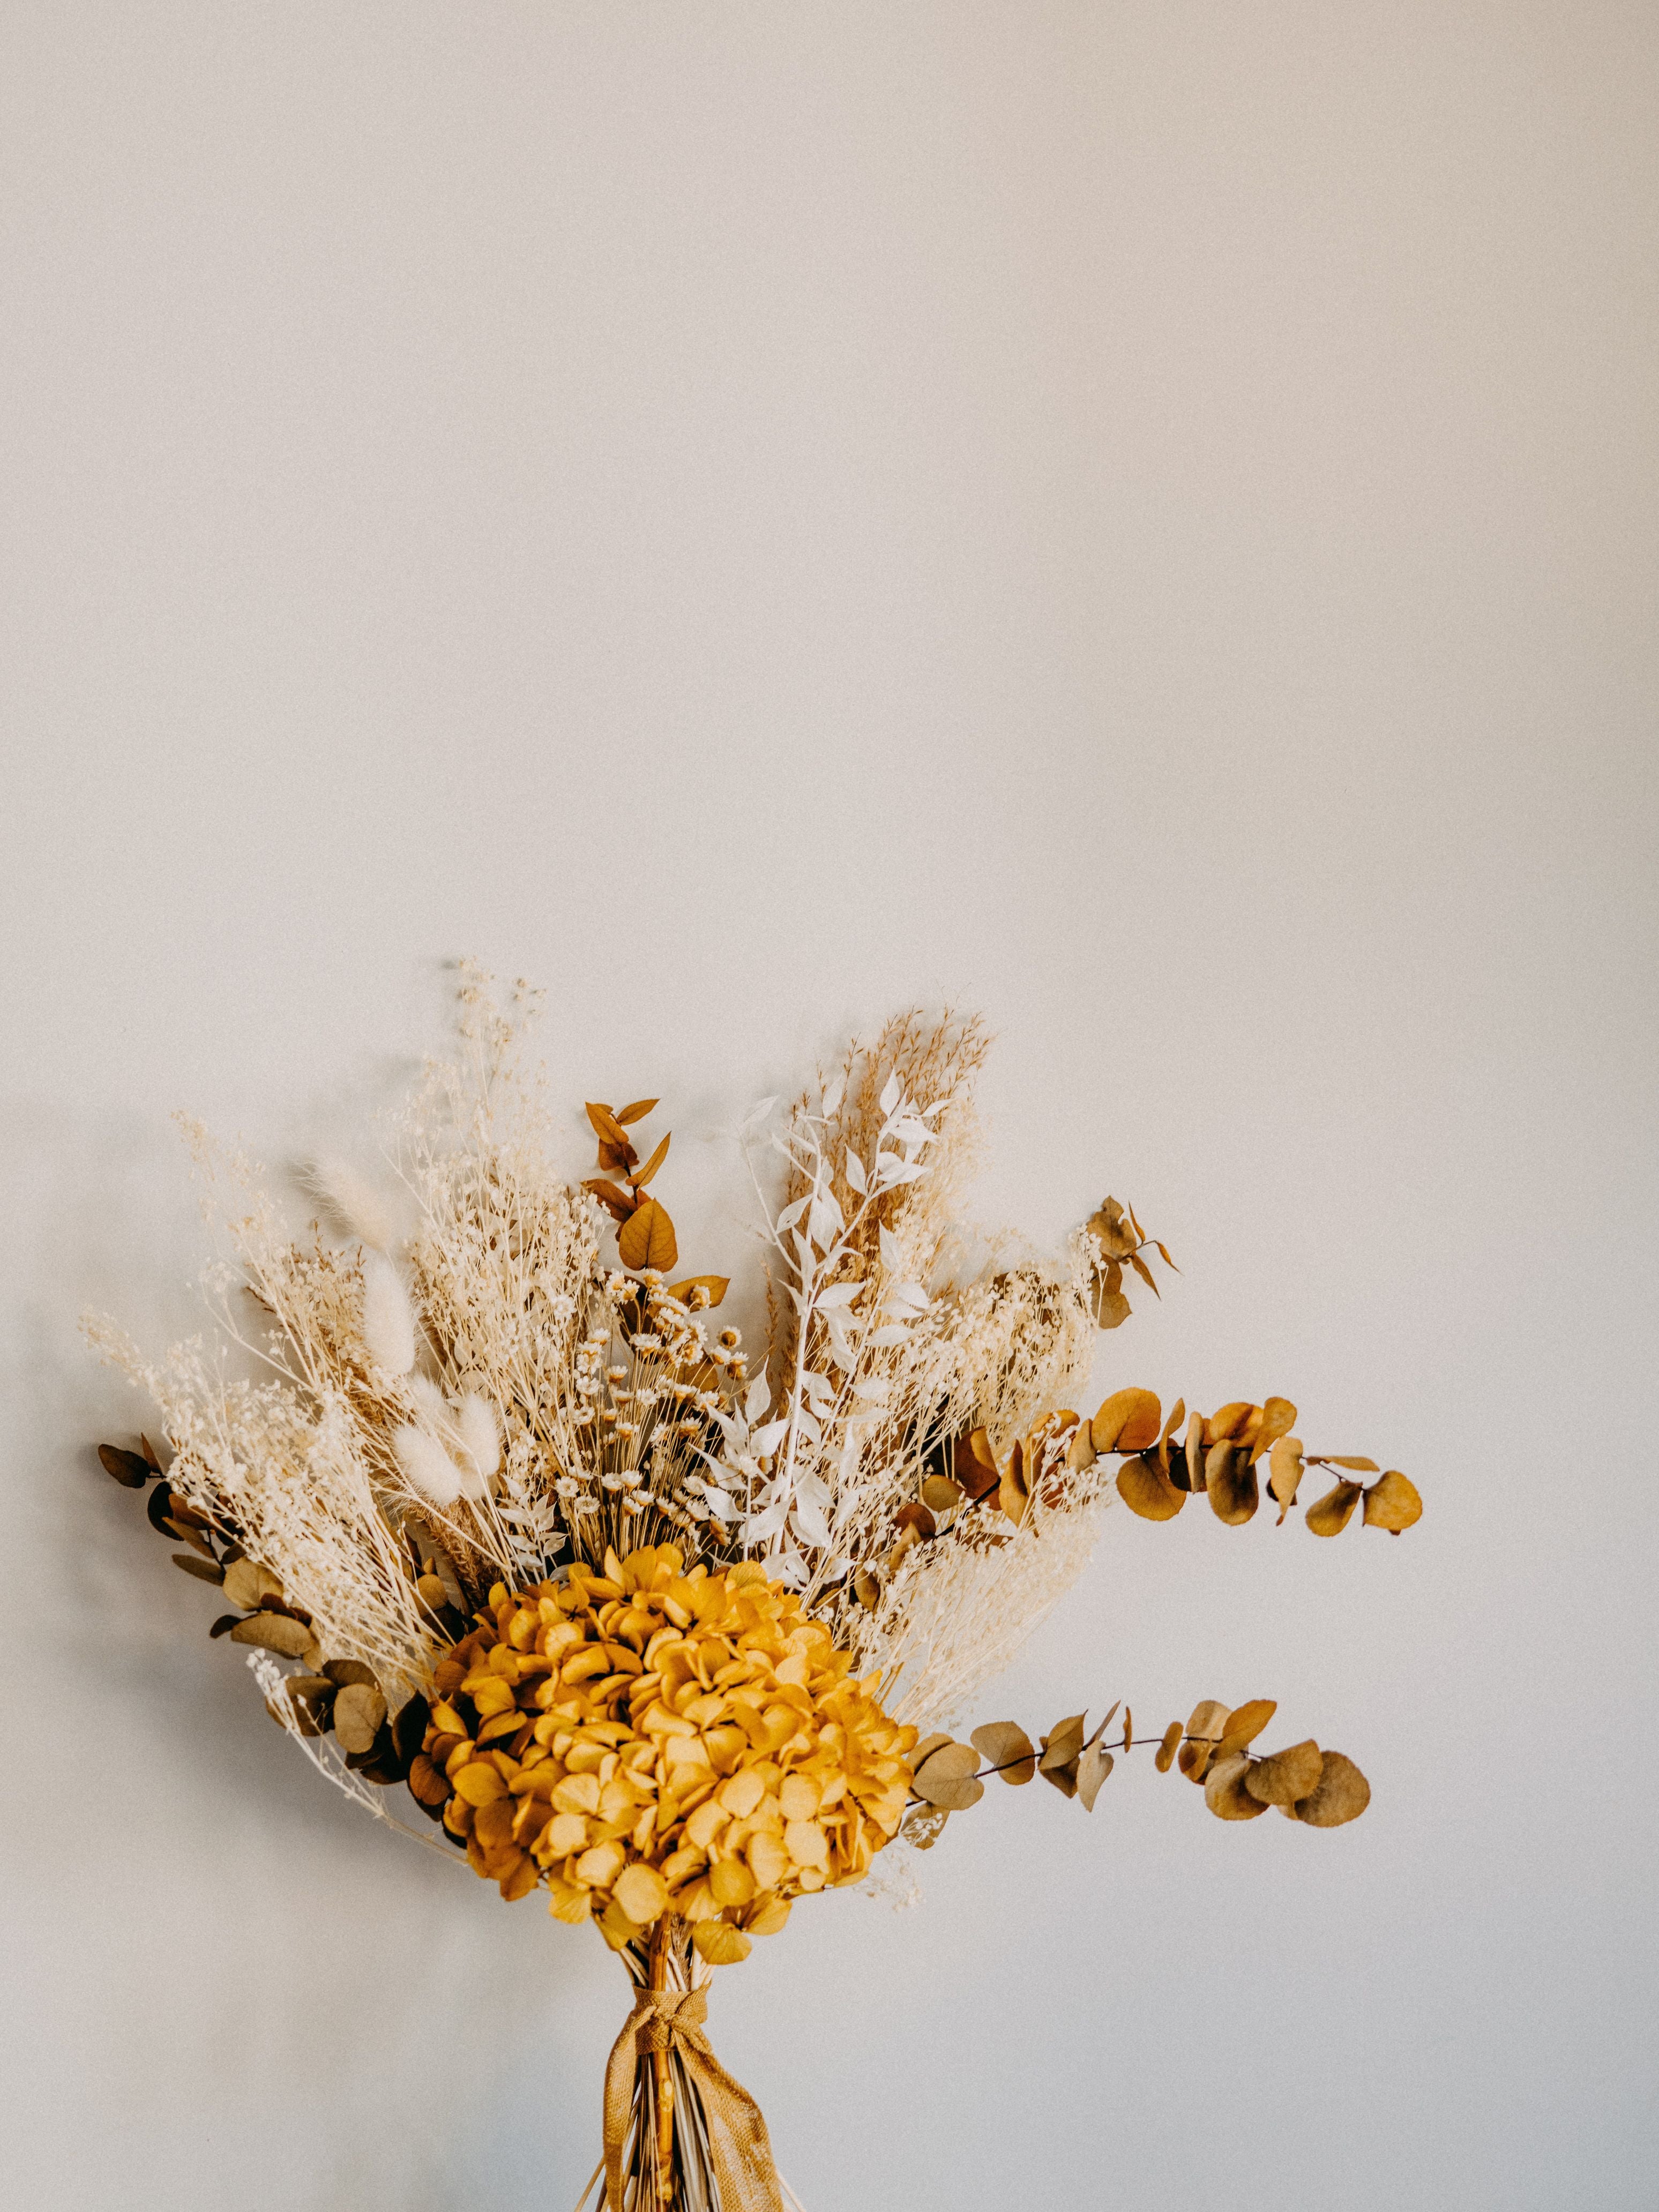 What Sealing Spray Do You Use on Dried Flowers?